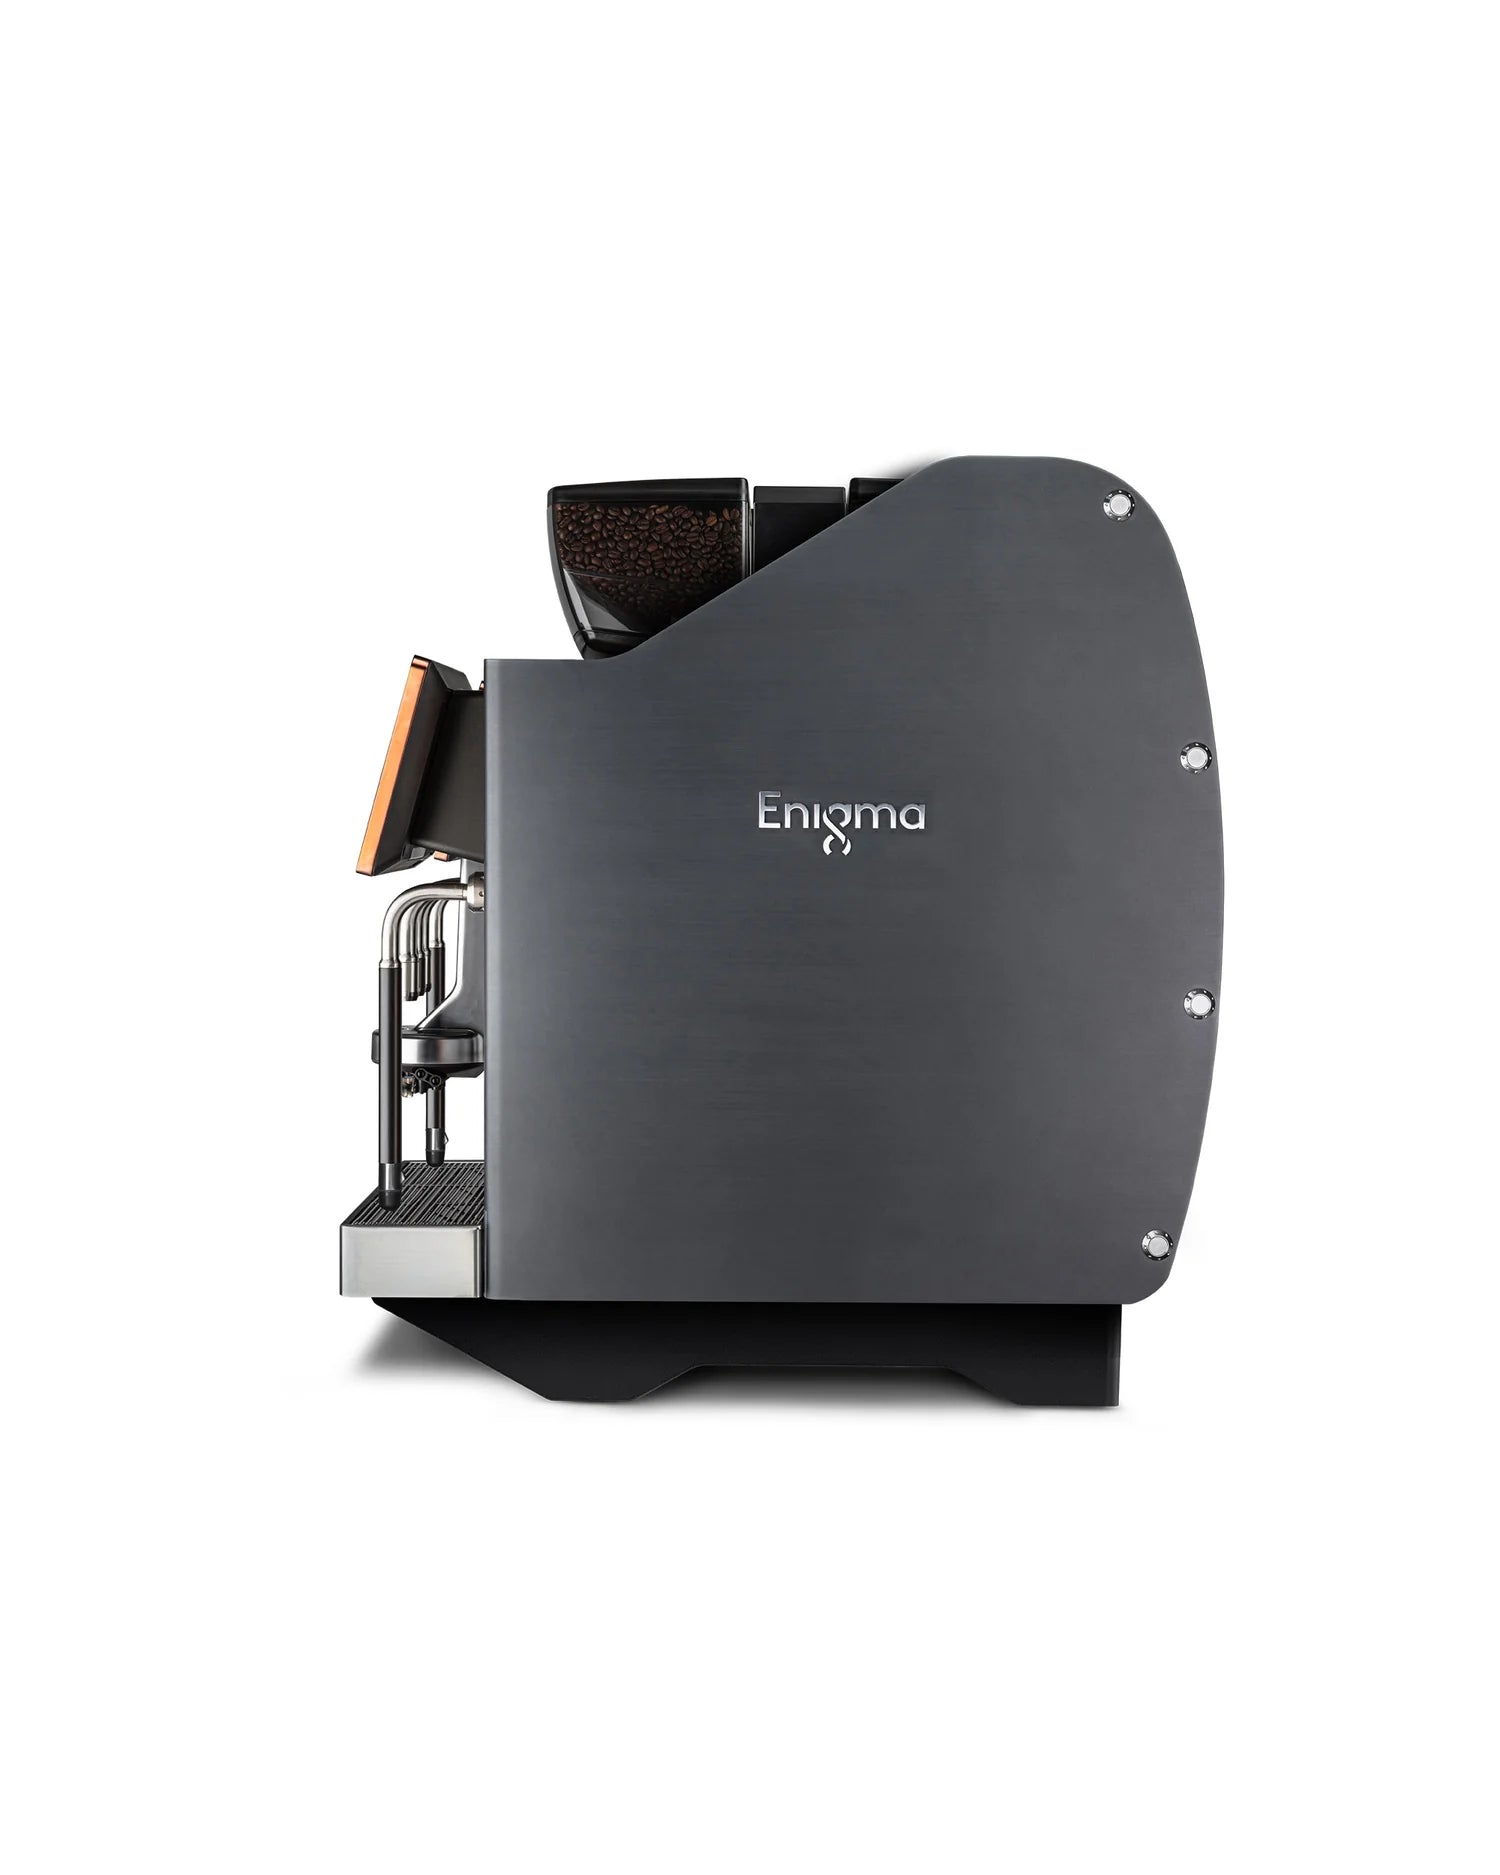 Eversys - Enigma E'4MS X-WIDE/ST